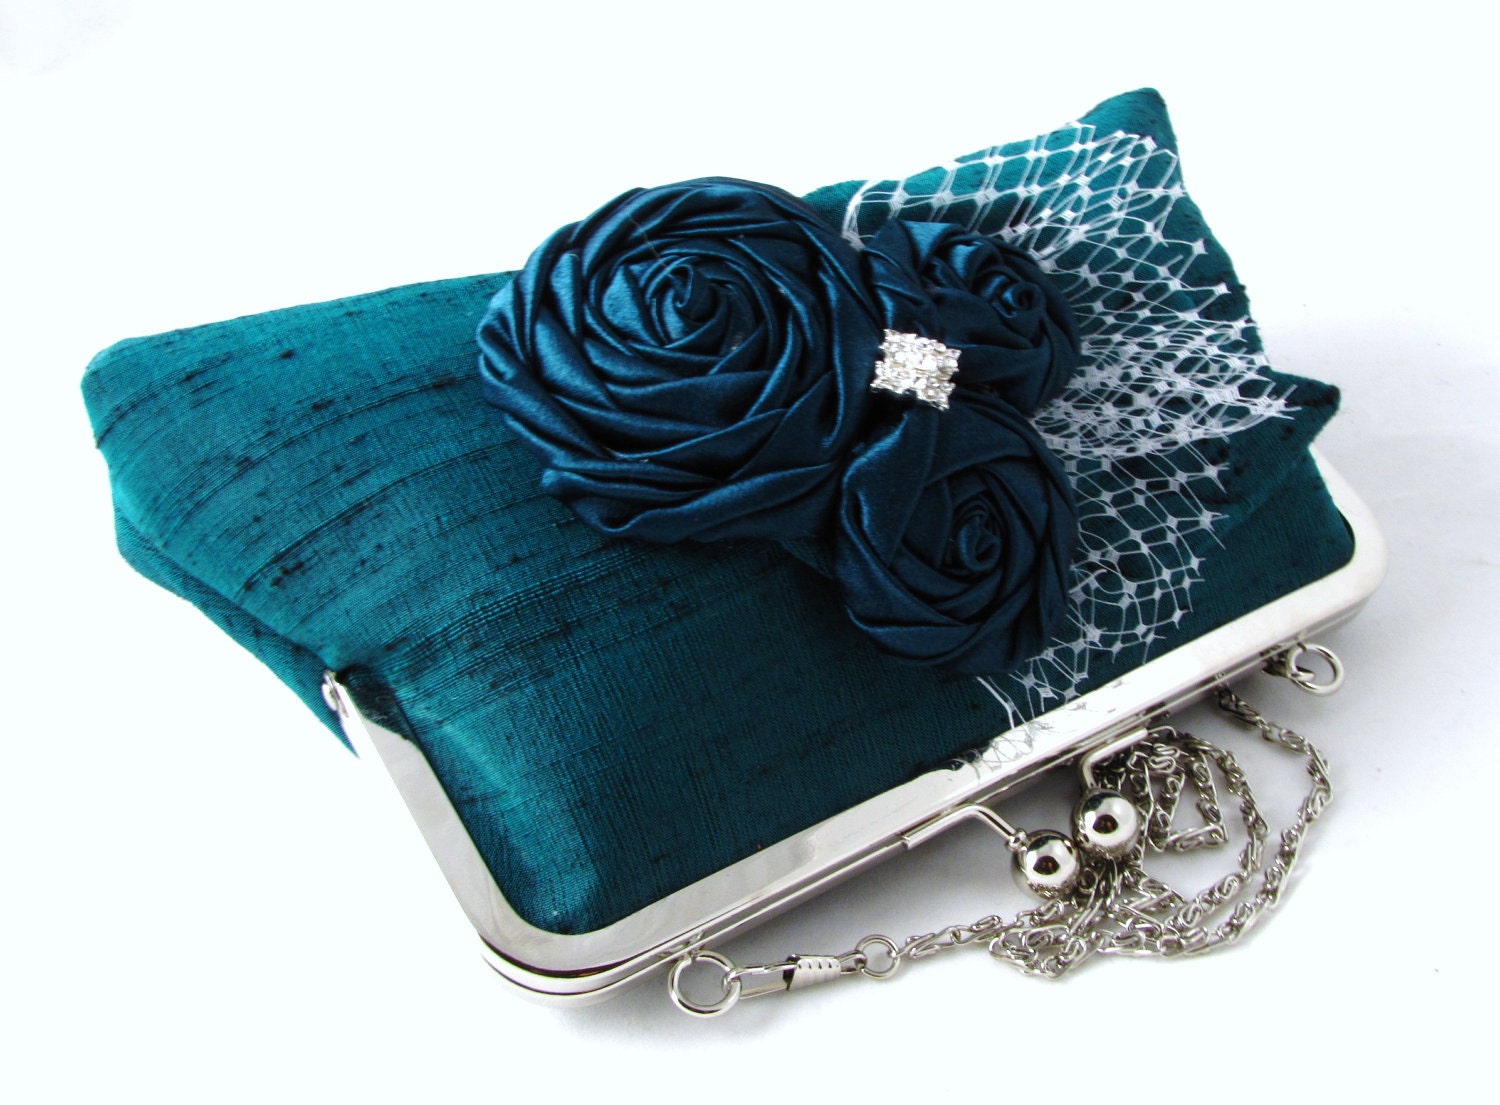 Evening clutch purse in teal green Wedding bridal clutch with rosettes and